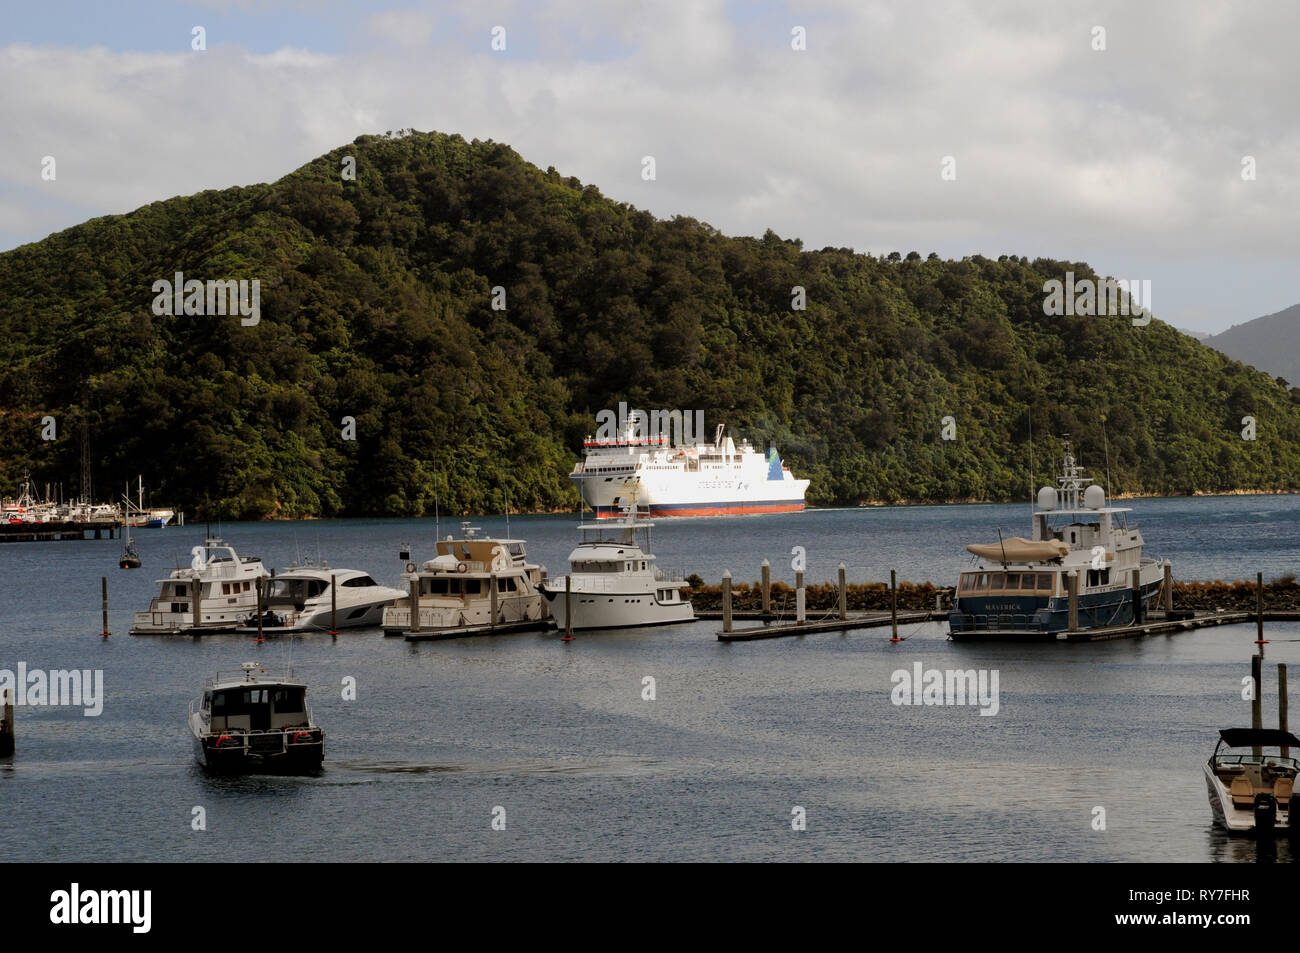 The InterIslander leaving Picton to cross the Cook Strait, connecting New Zealand's North and South Islands. The ferry carries passengers and freight. Stock Photo